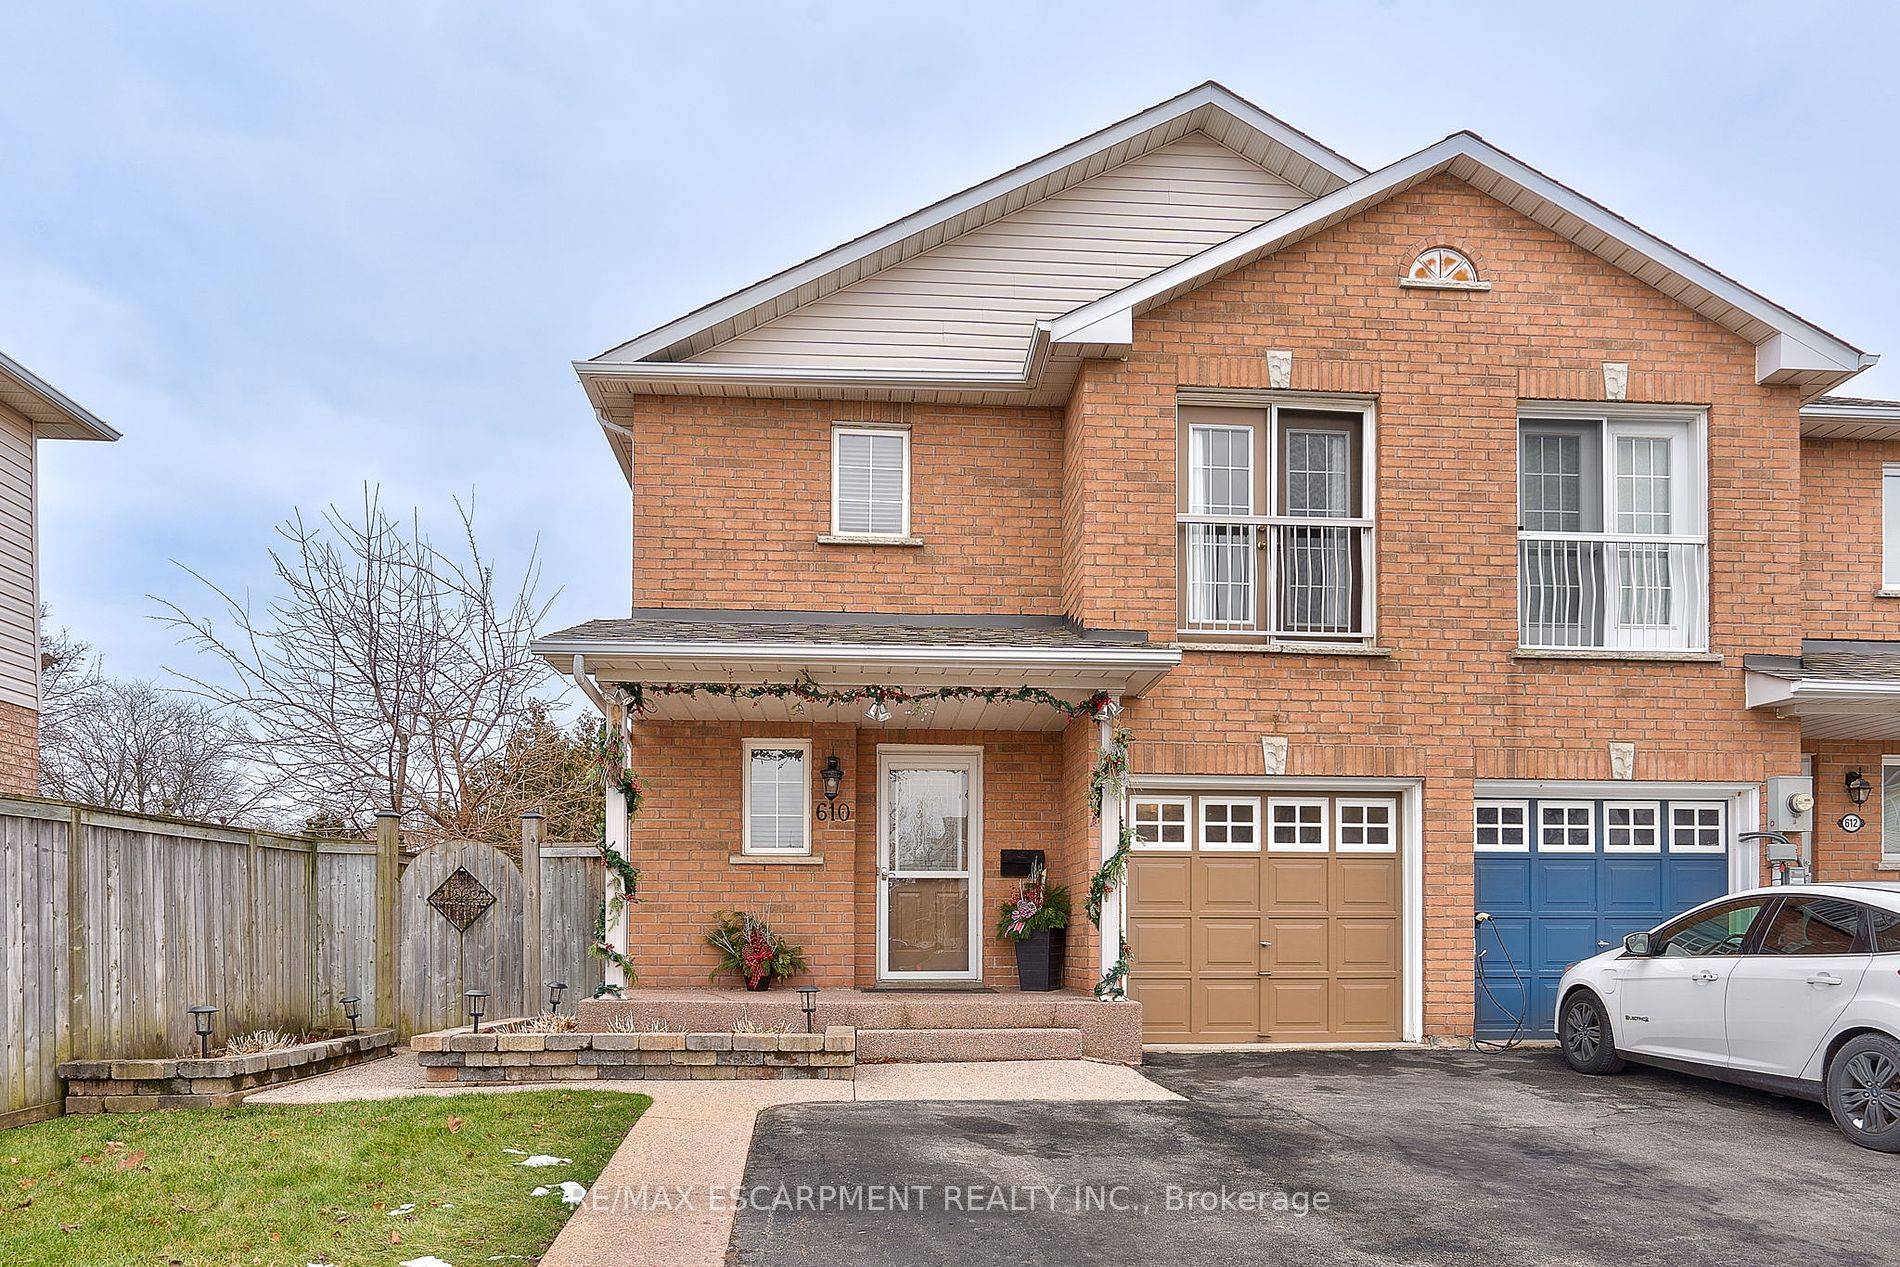 Welcome to this beautiful 2 Storey, 3 bed, 2 2 bath end unit townhome located in the sought after Longmoor area of Burlington.